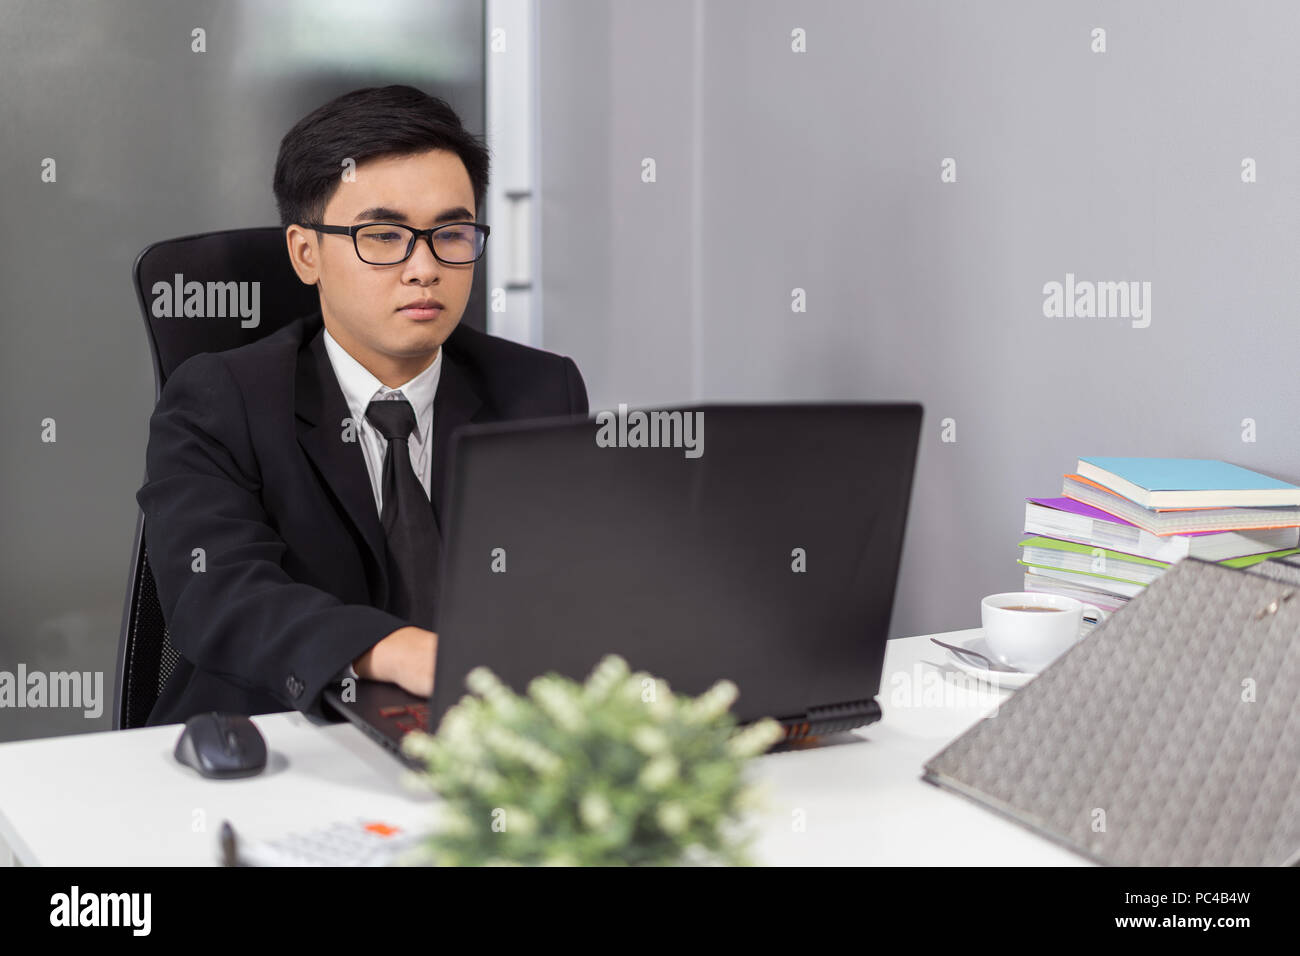 young business man using laptop computer Stock Photo